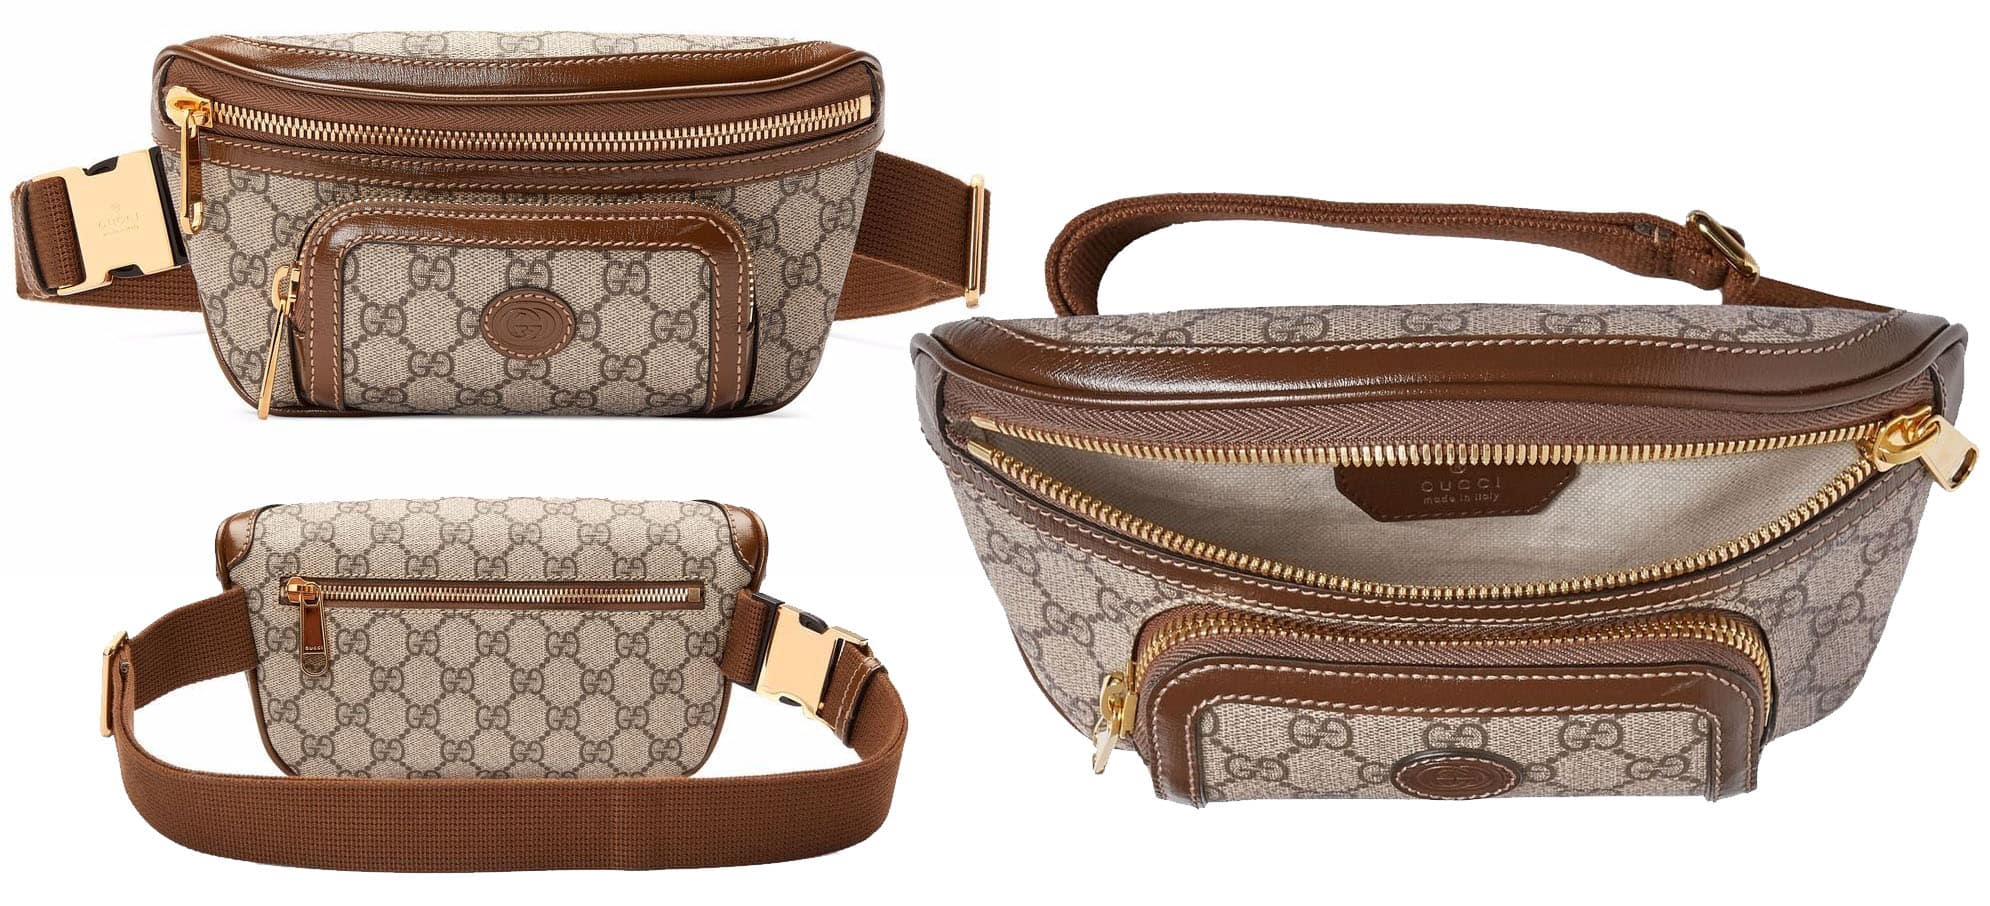 Featuring a vintage-inspired look, this Gucci belt bag is crafted from beige and ebony GG Supreme canvas with a brown leather trim